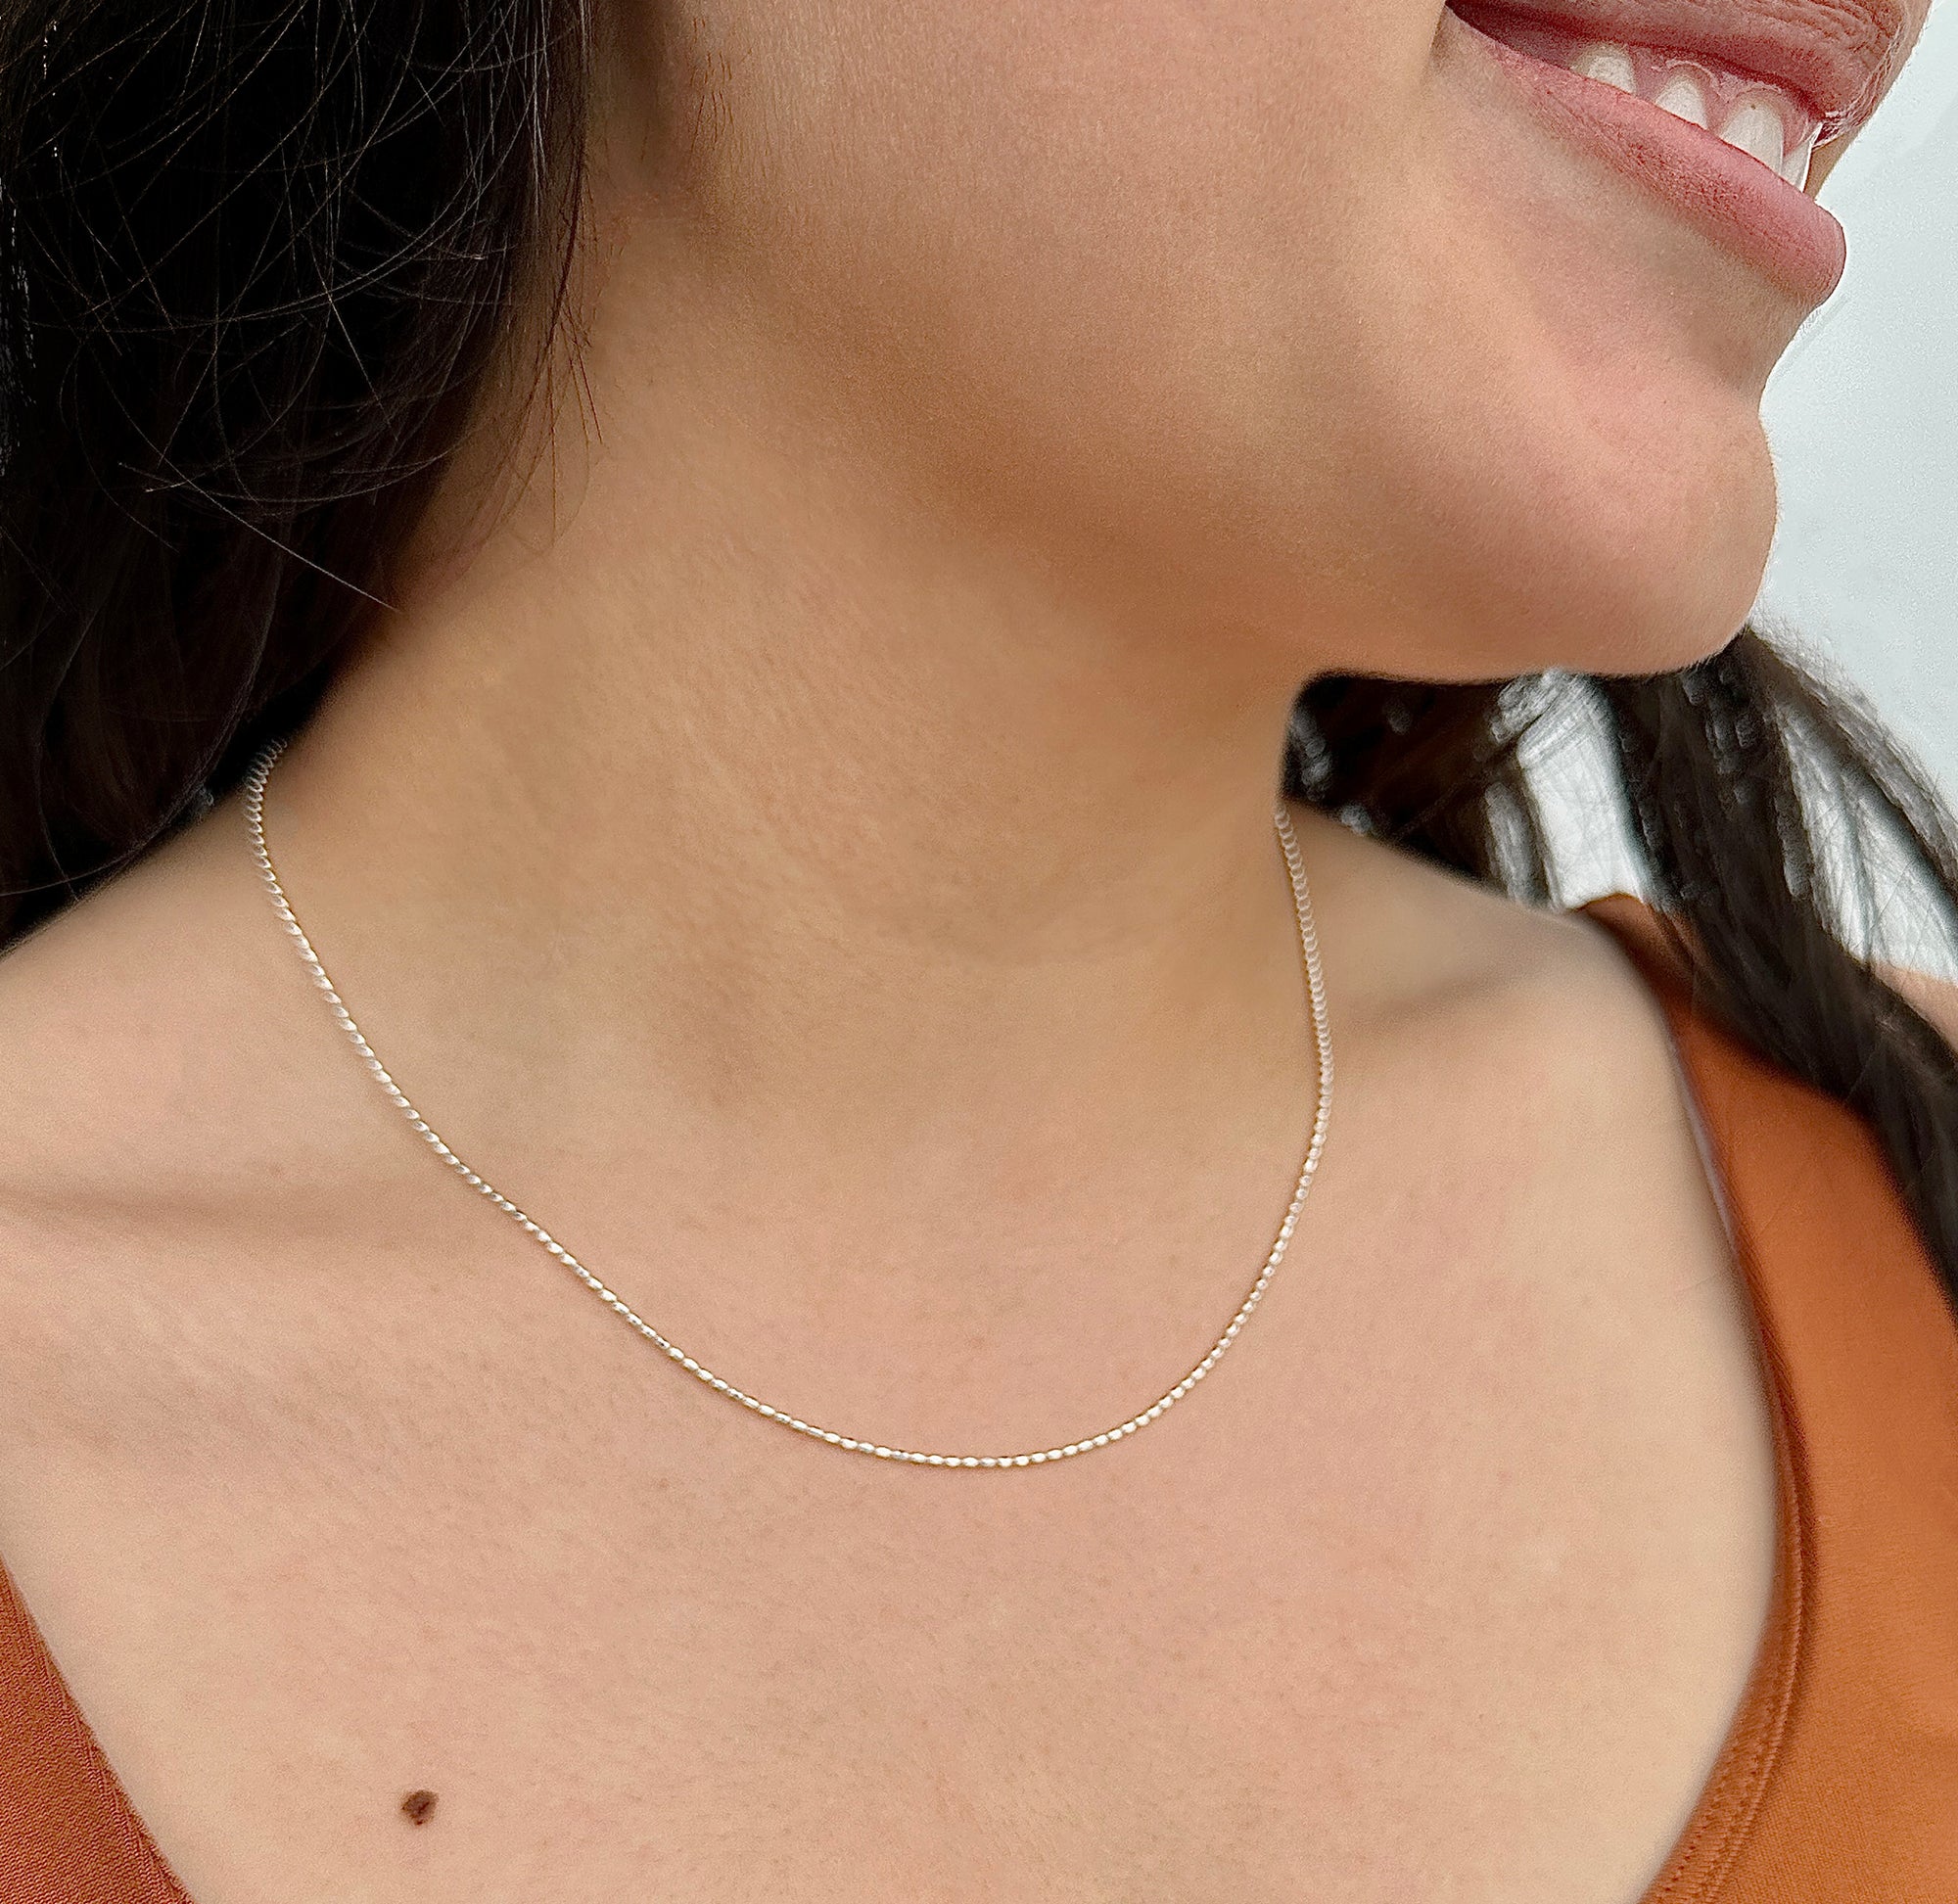 women wearing a dainty silver chain necklace with oval silver beads